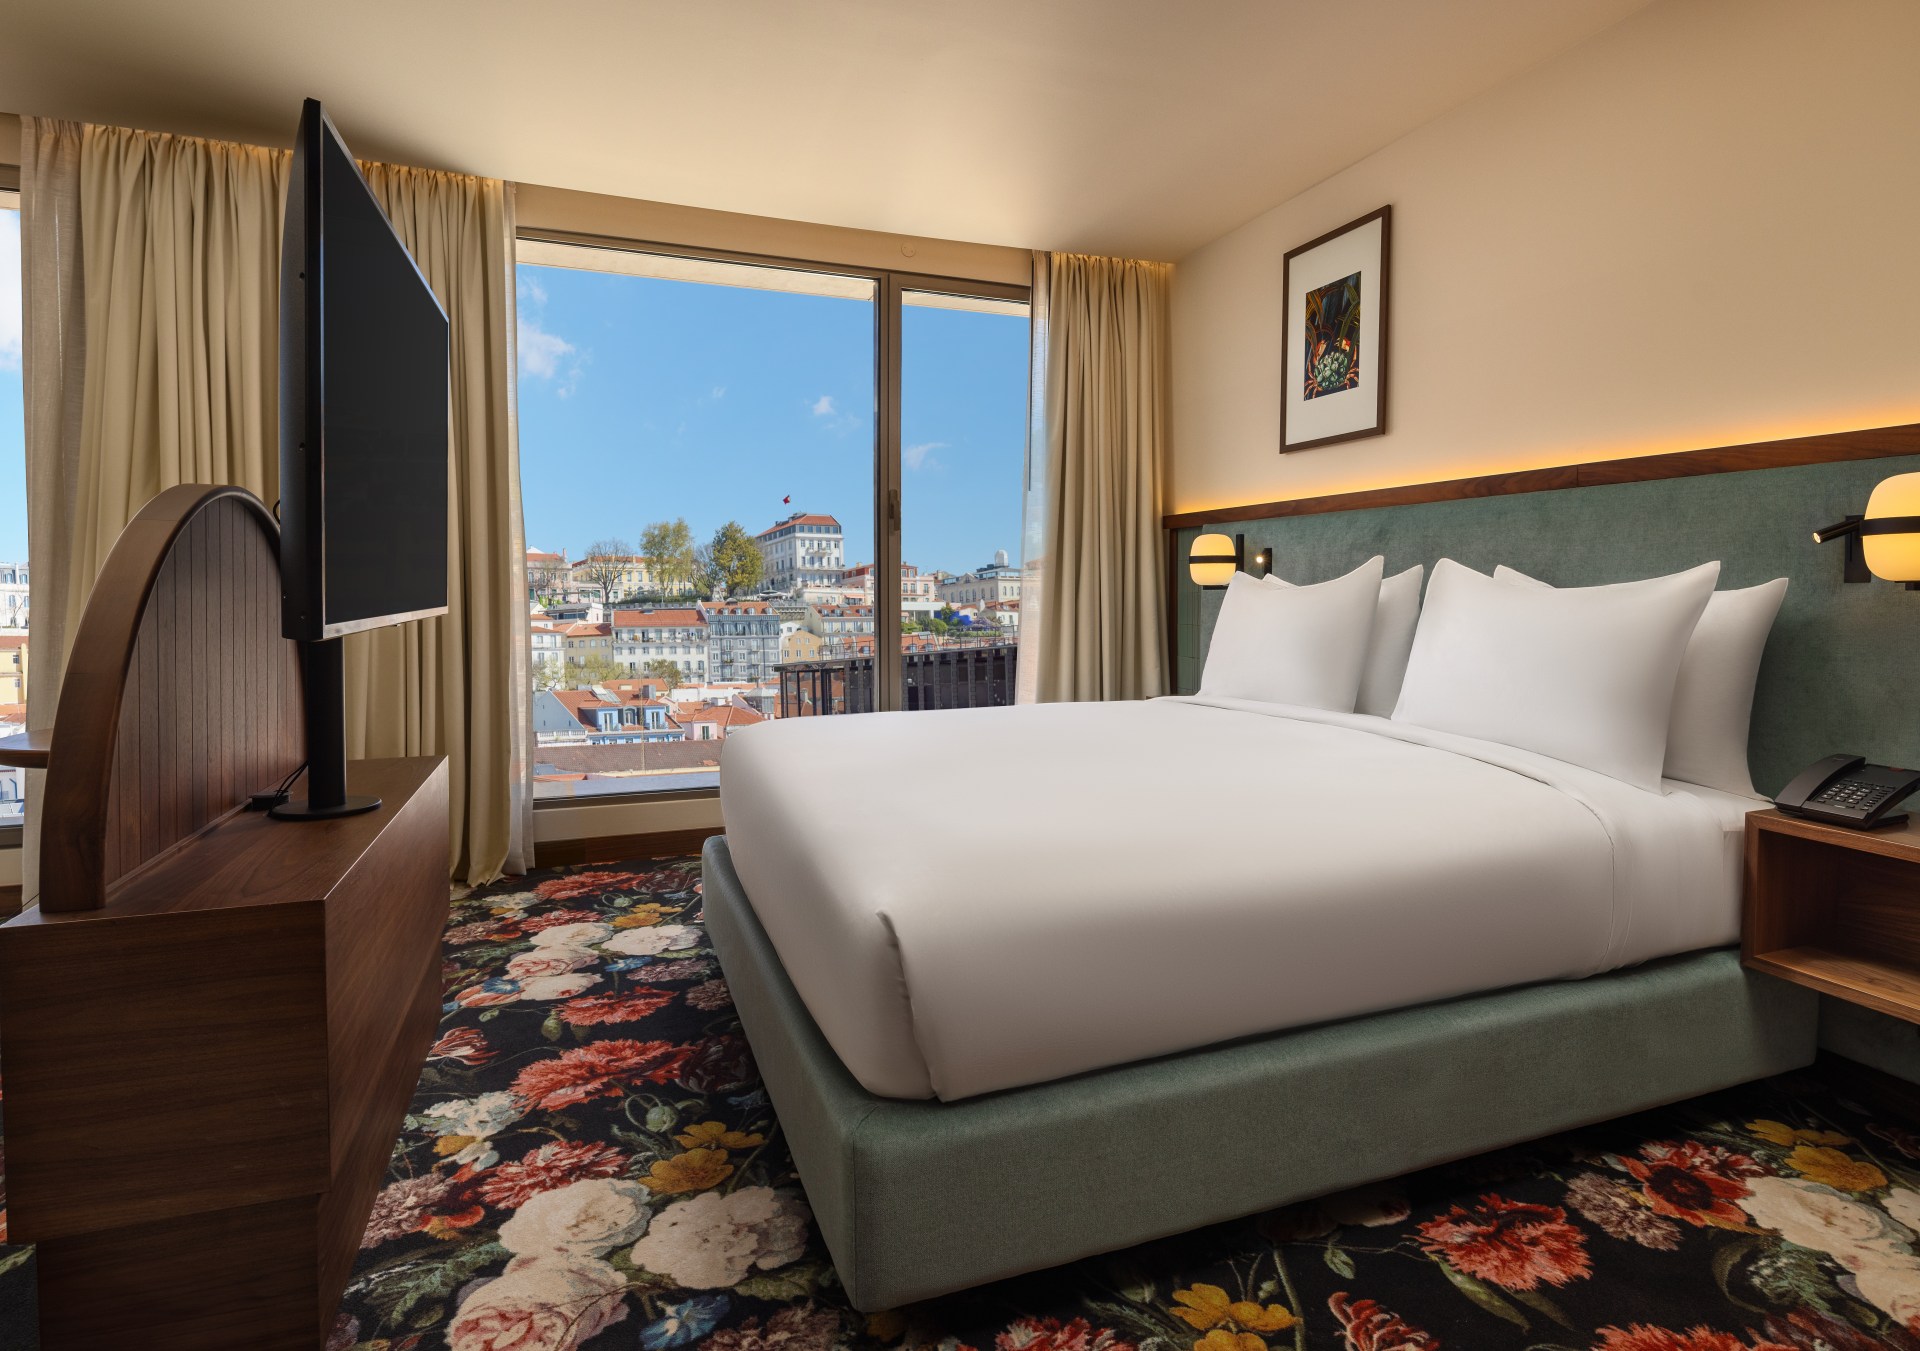 guest room with bed, tv, colorful flower carpet and window looking out at Lisbon - DUO Hotel Lisbon, Curio Collection by Hilton